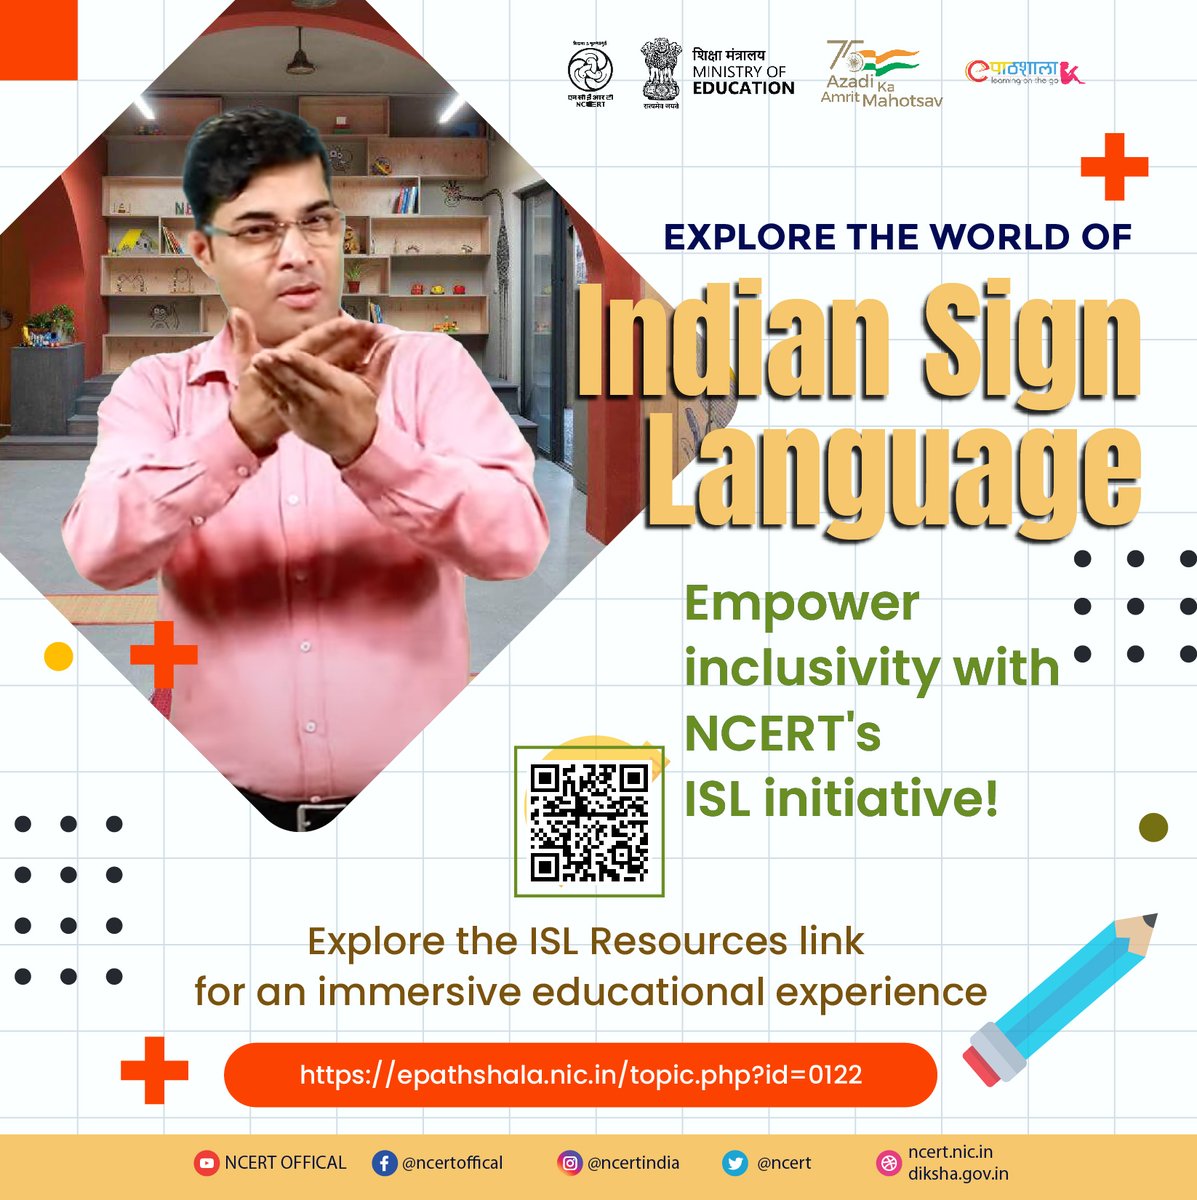 Join NCERT in celebrating inclusivity and breaking barriers in education! Our commitment to Universal Design for Learning (UDL) is evident in the development of Teaching Learning Resources in Indian Sign Language (ISL), fostering an inclusive learning environment for students.